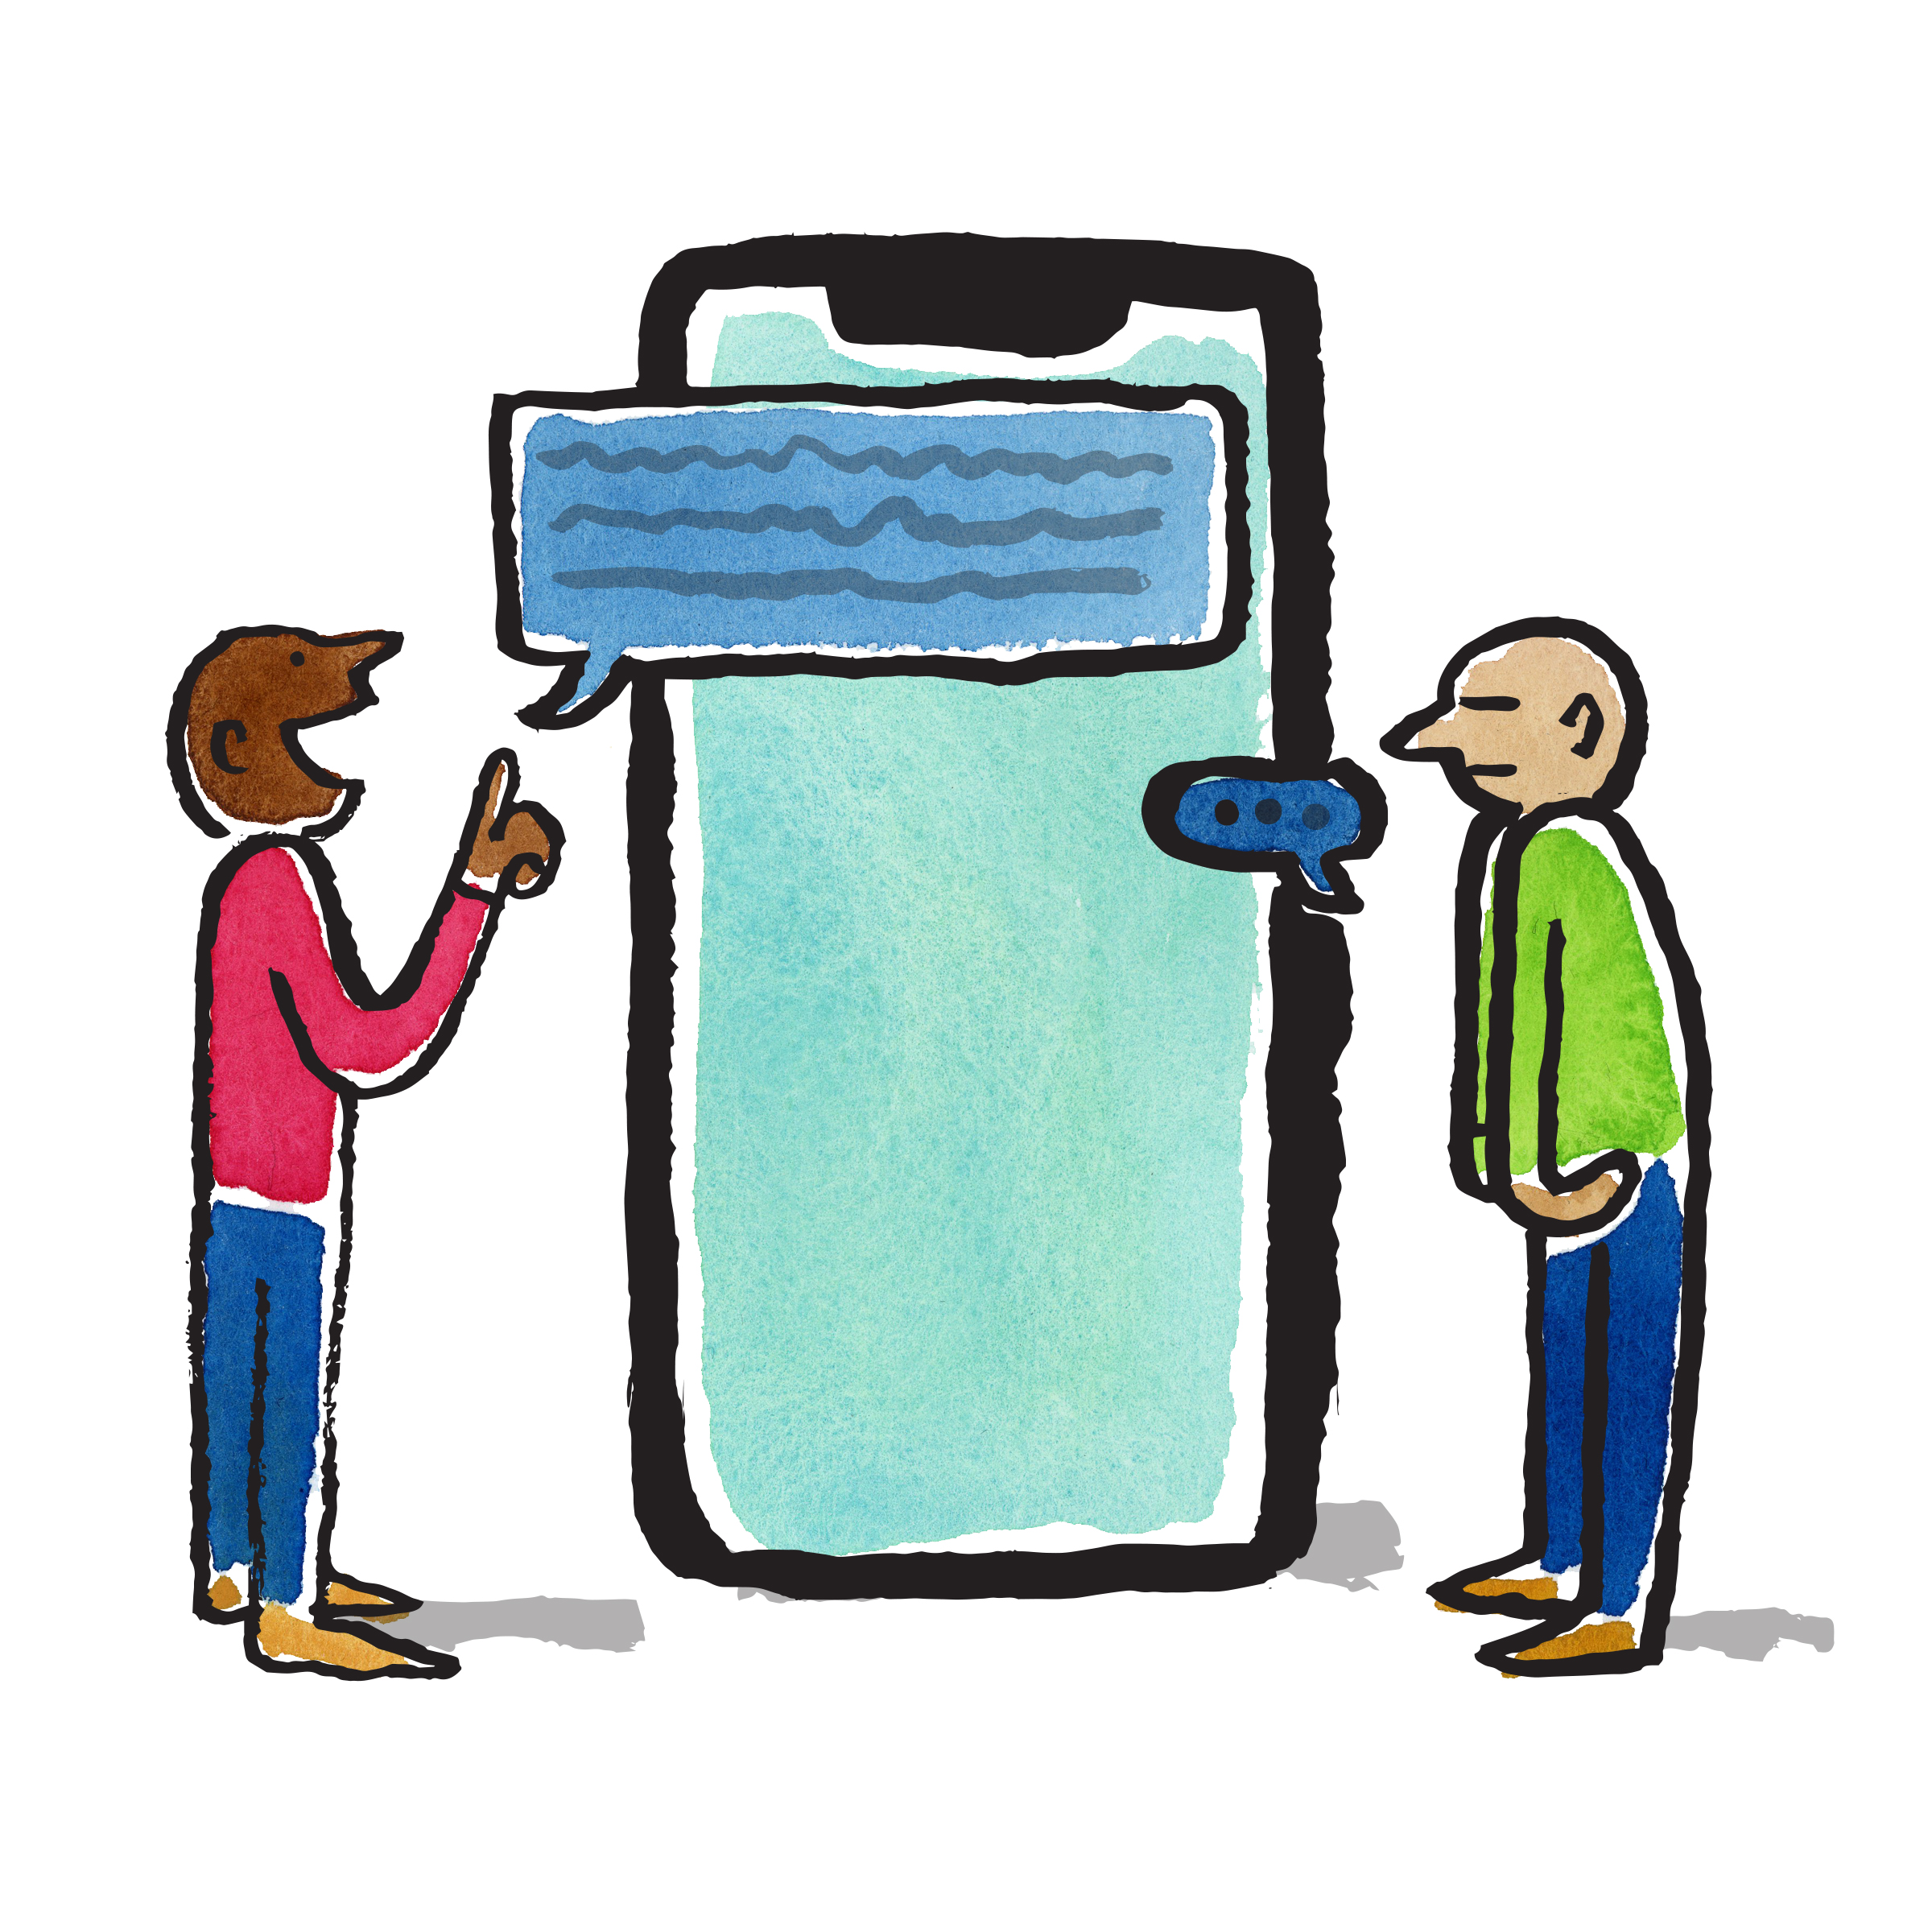 Two people standing next to a large phone with text message bubbles